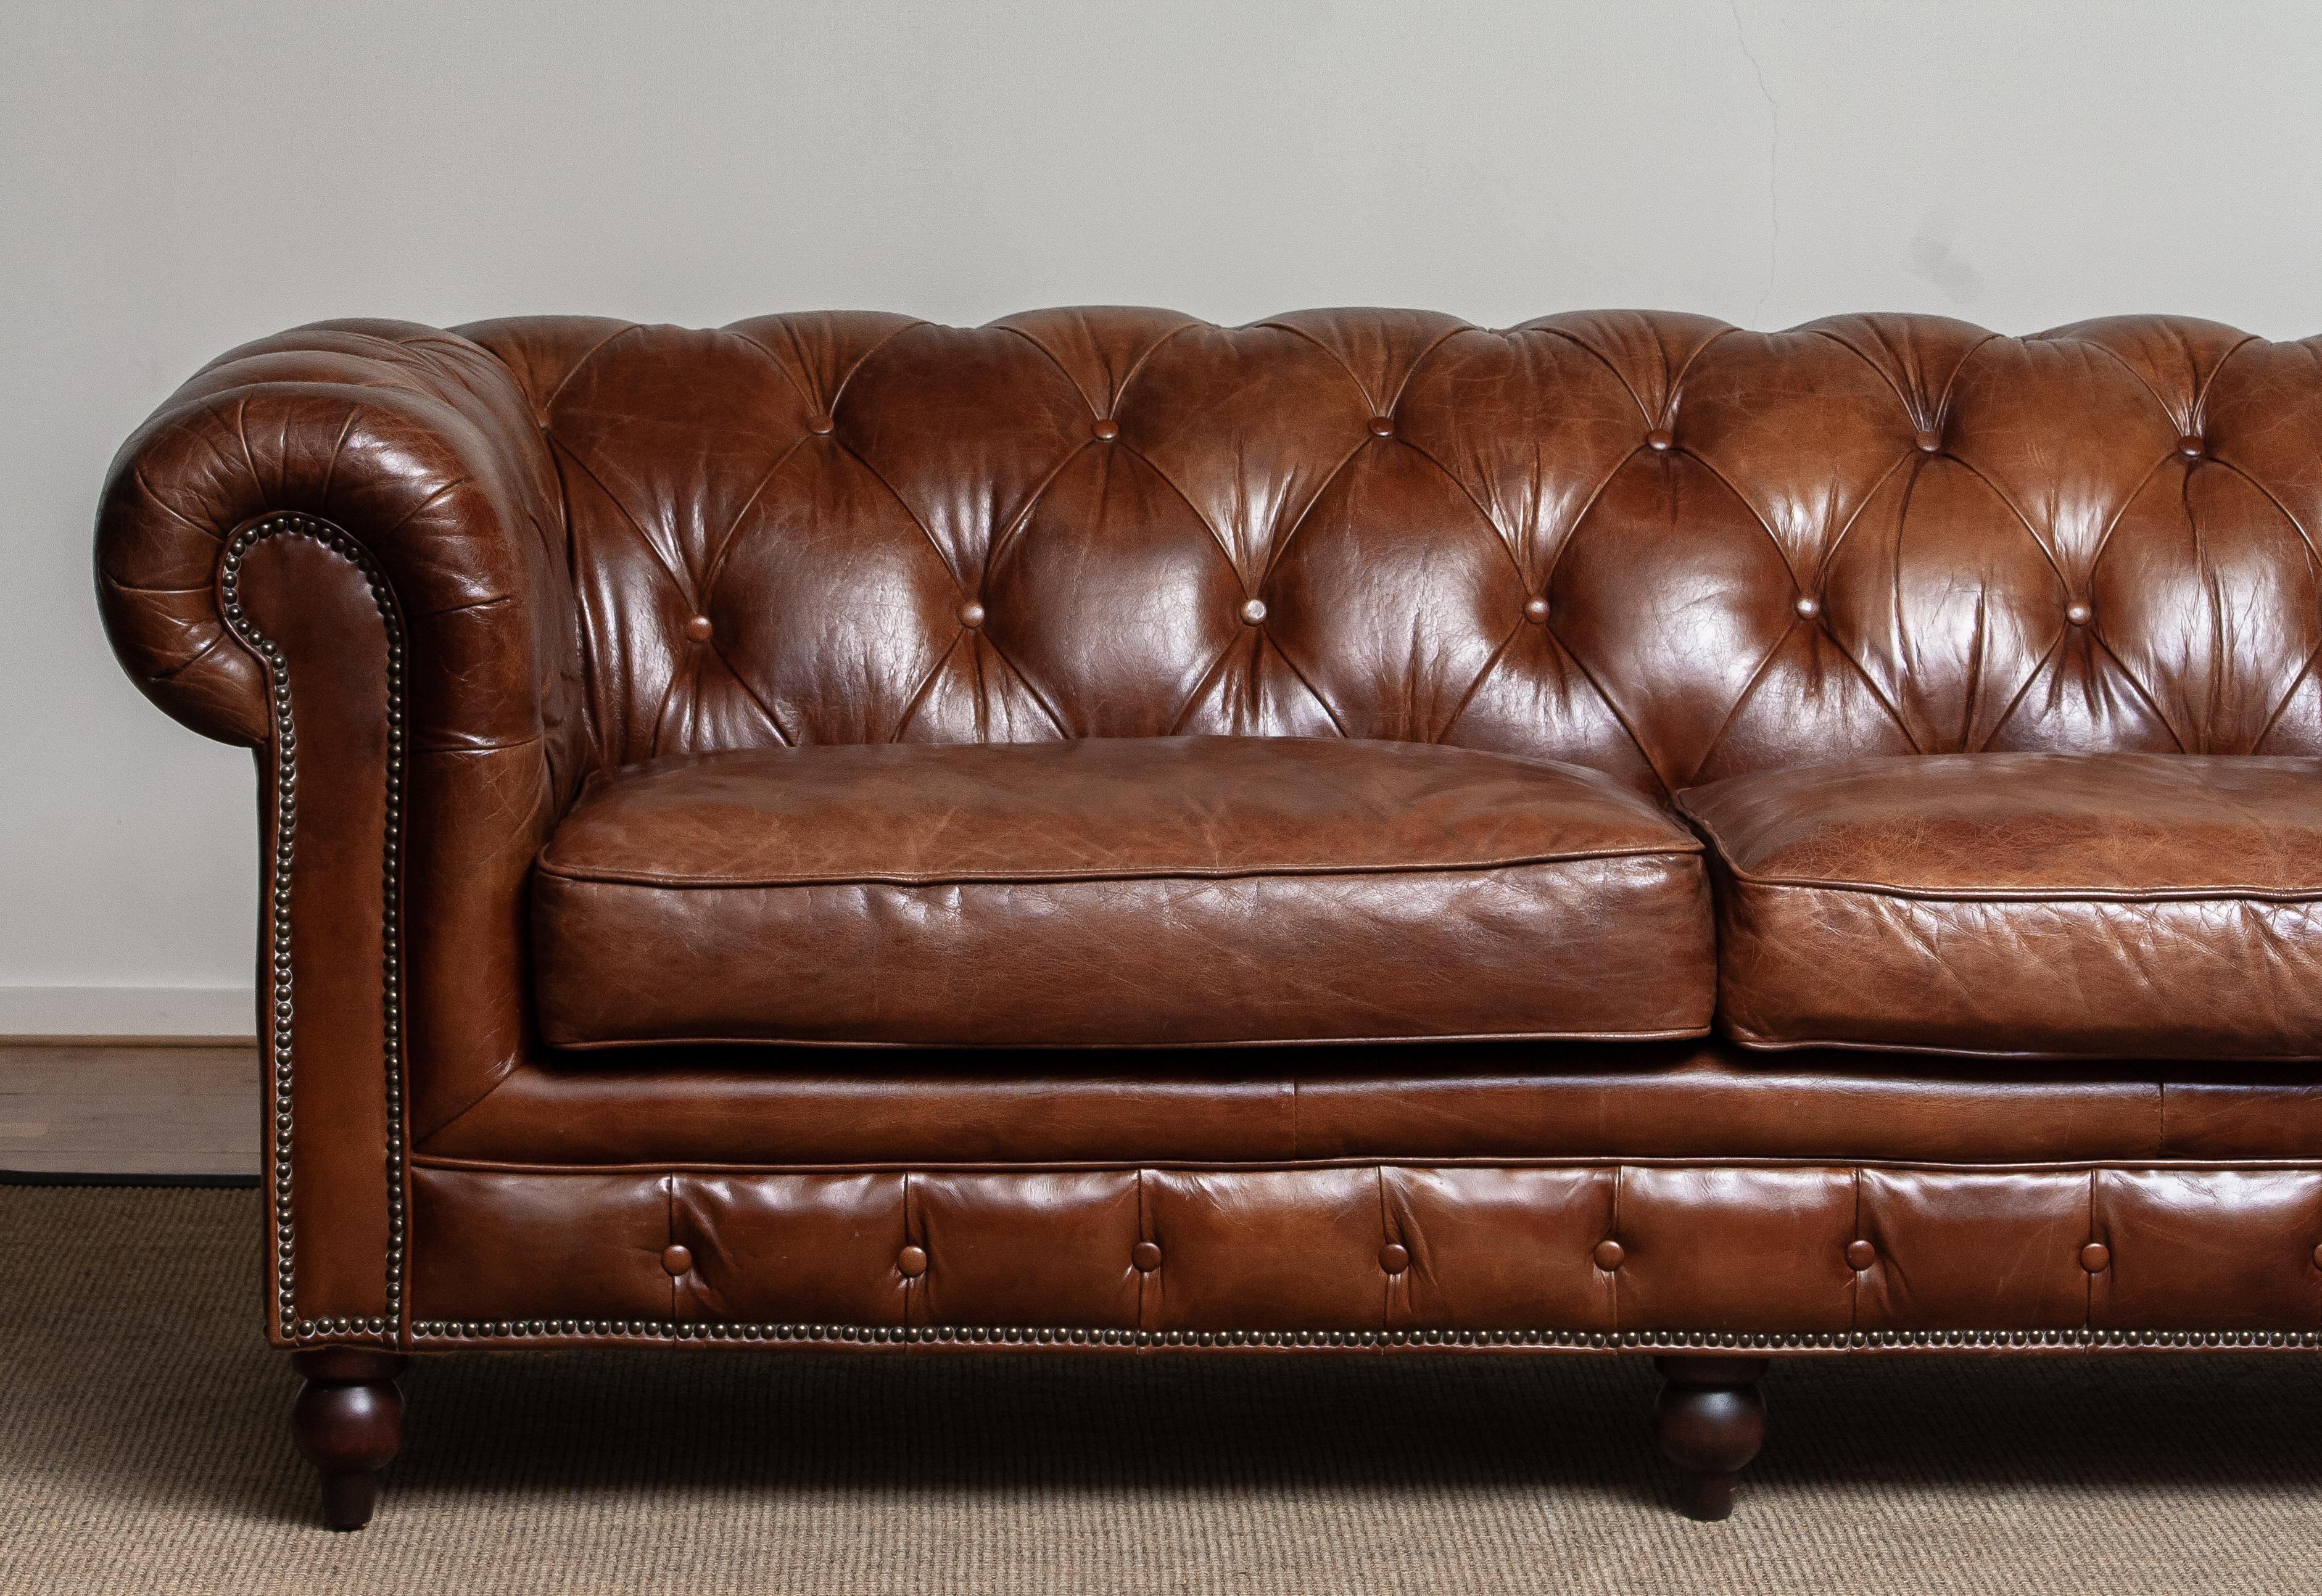 Tufted Brown Leather English Chesterfield Sofa from the 20th Century 11